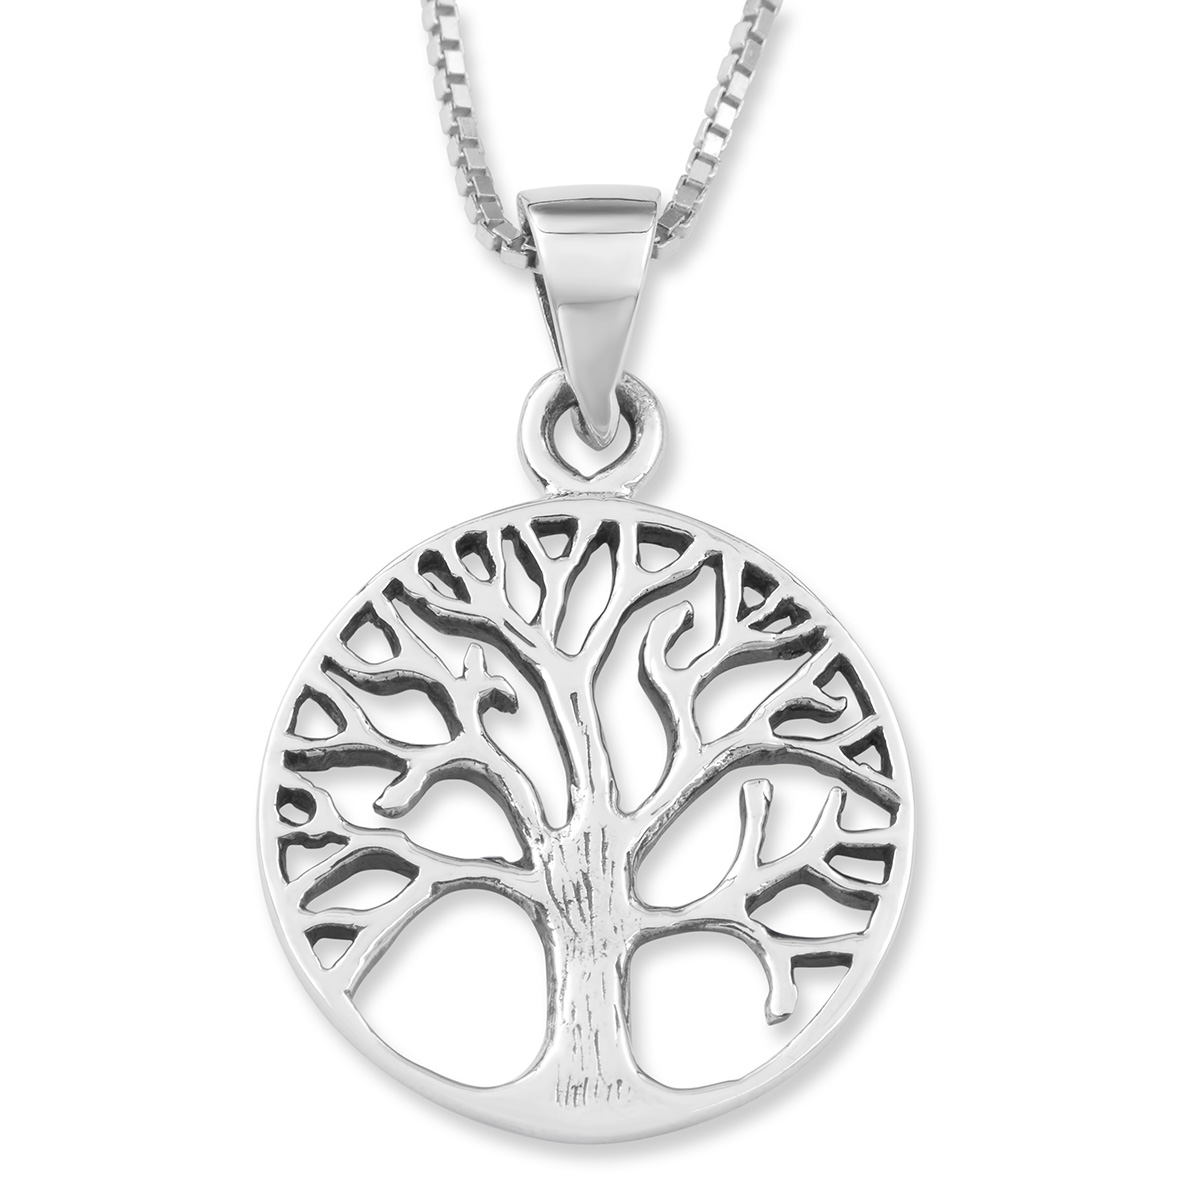 Sterling Silver Circular Pendant Necklace With Tree of Life Design, Jewelry  | Judaica Webstore